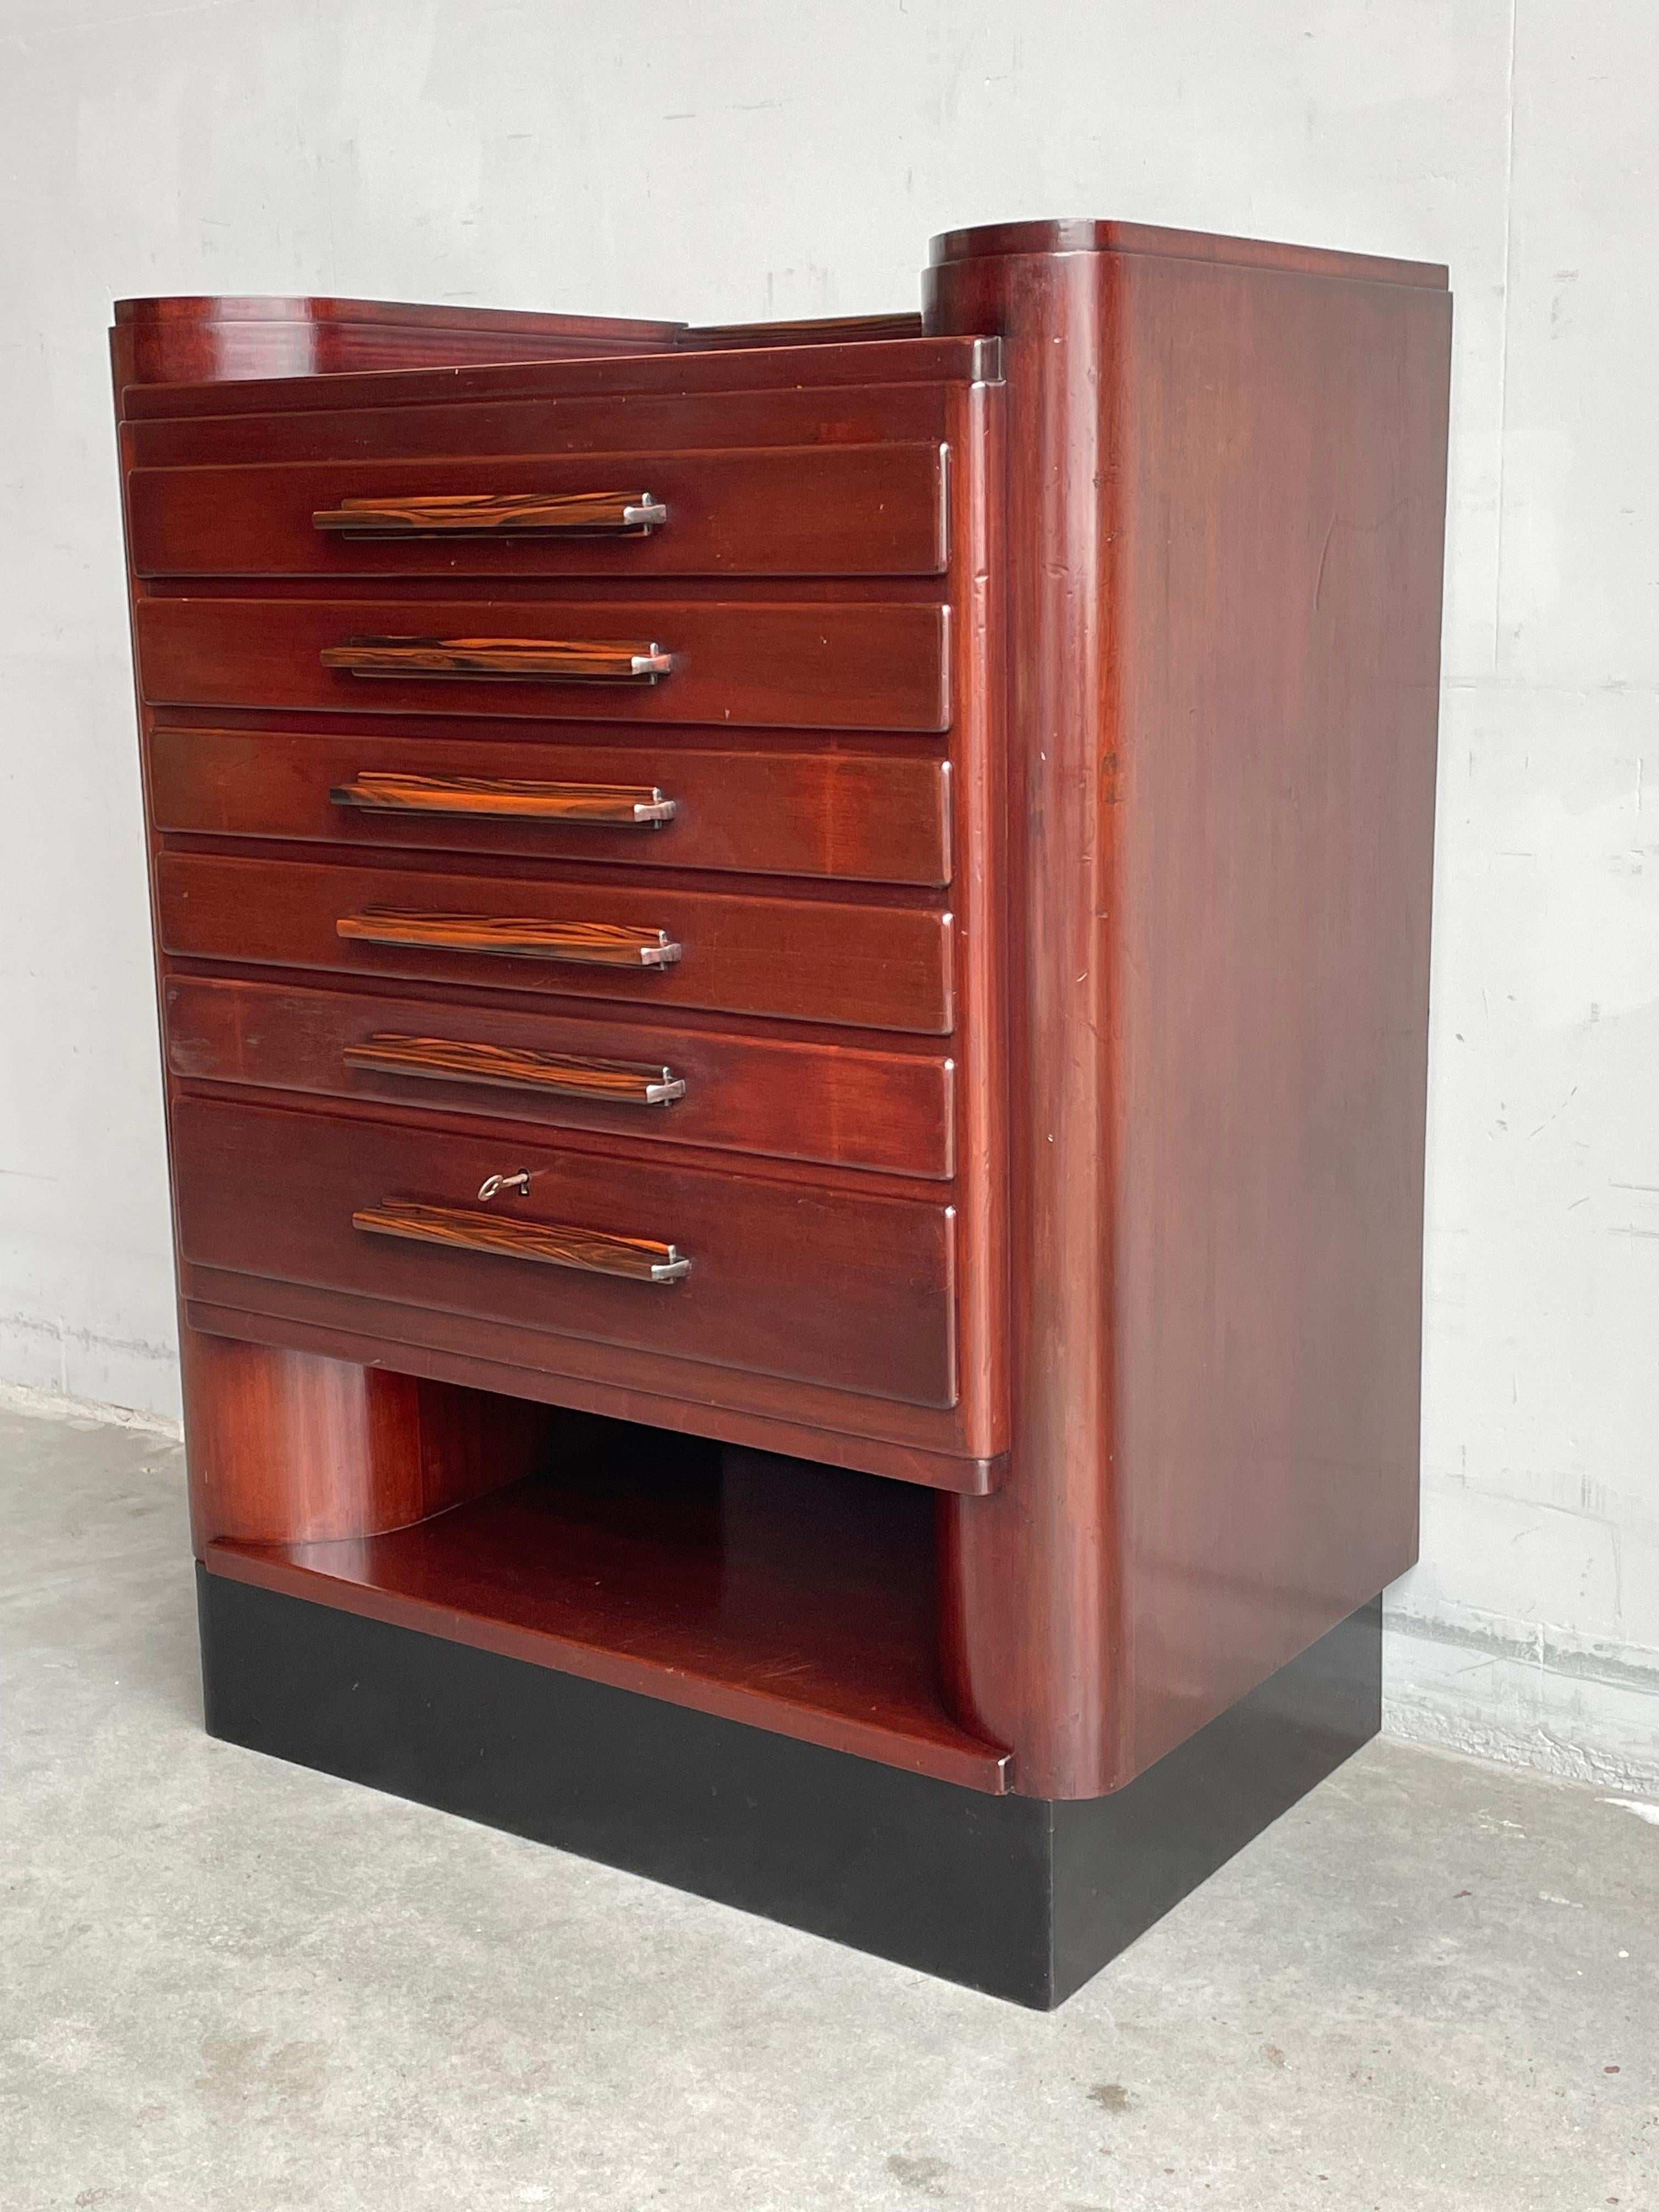 Dutch Rare Art Deco Chest of Drawers / Filing Cabinet with Stunning Coromandel Handles For Sale